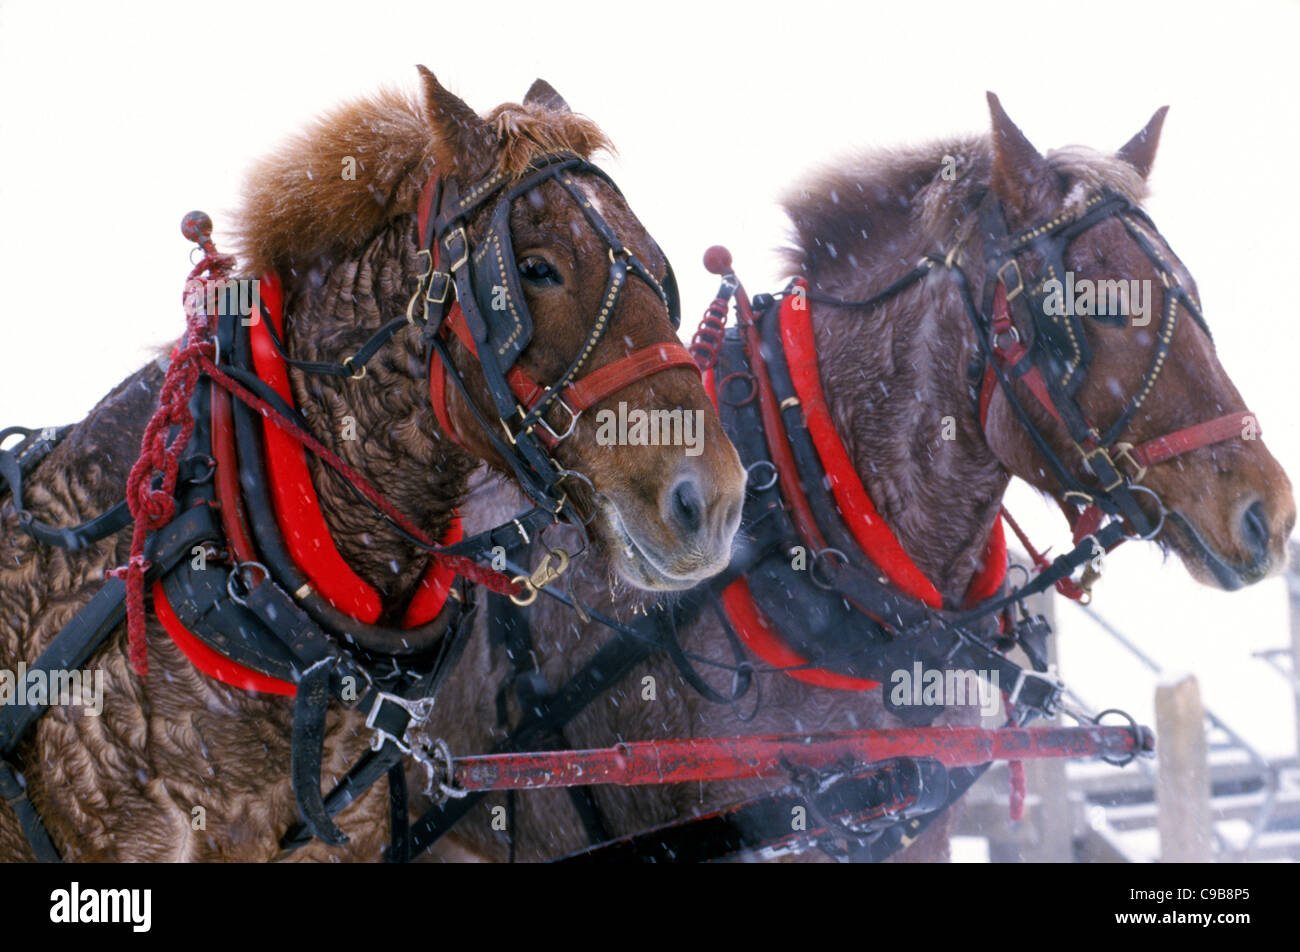 A pair of harnessed horses are oblivious to falling snow as they pull a sleigh with tourists during a cold winter day in Jackson Hole, Wyoming, USA. Stock Photo